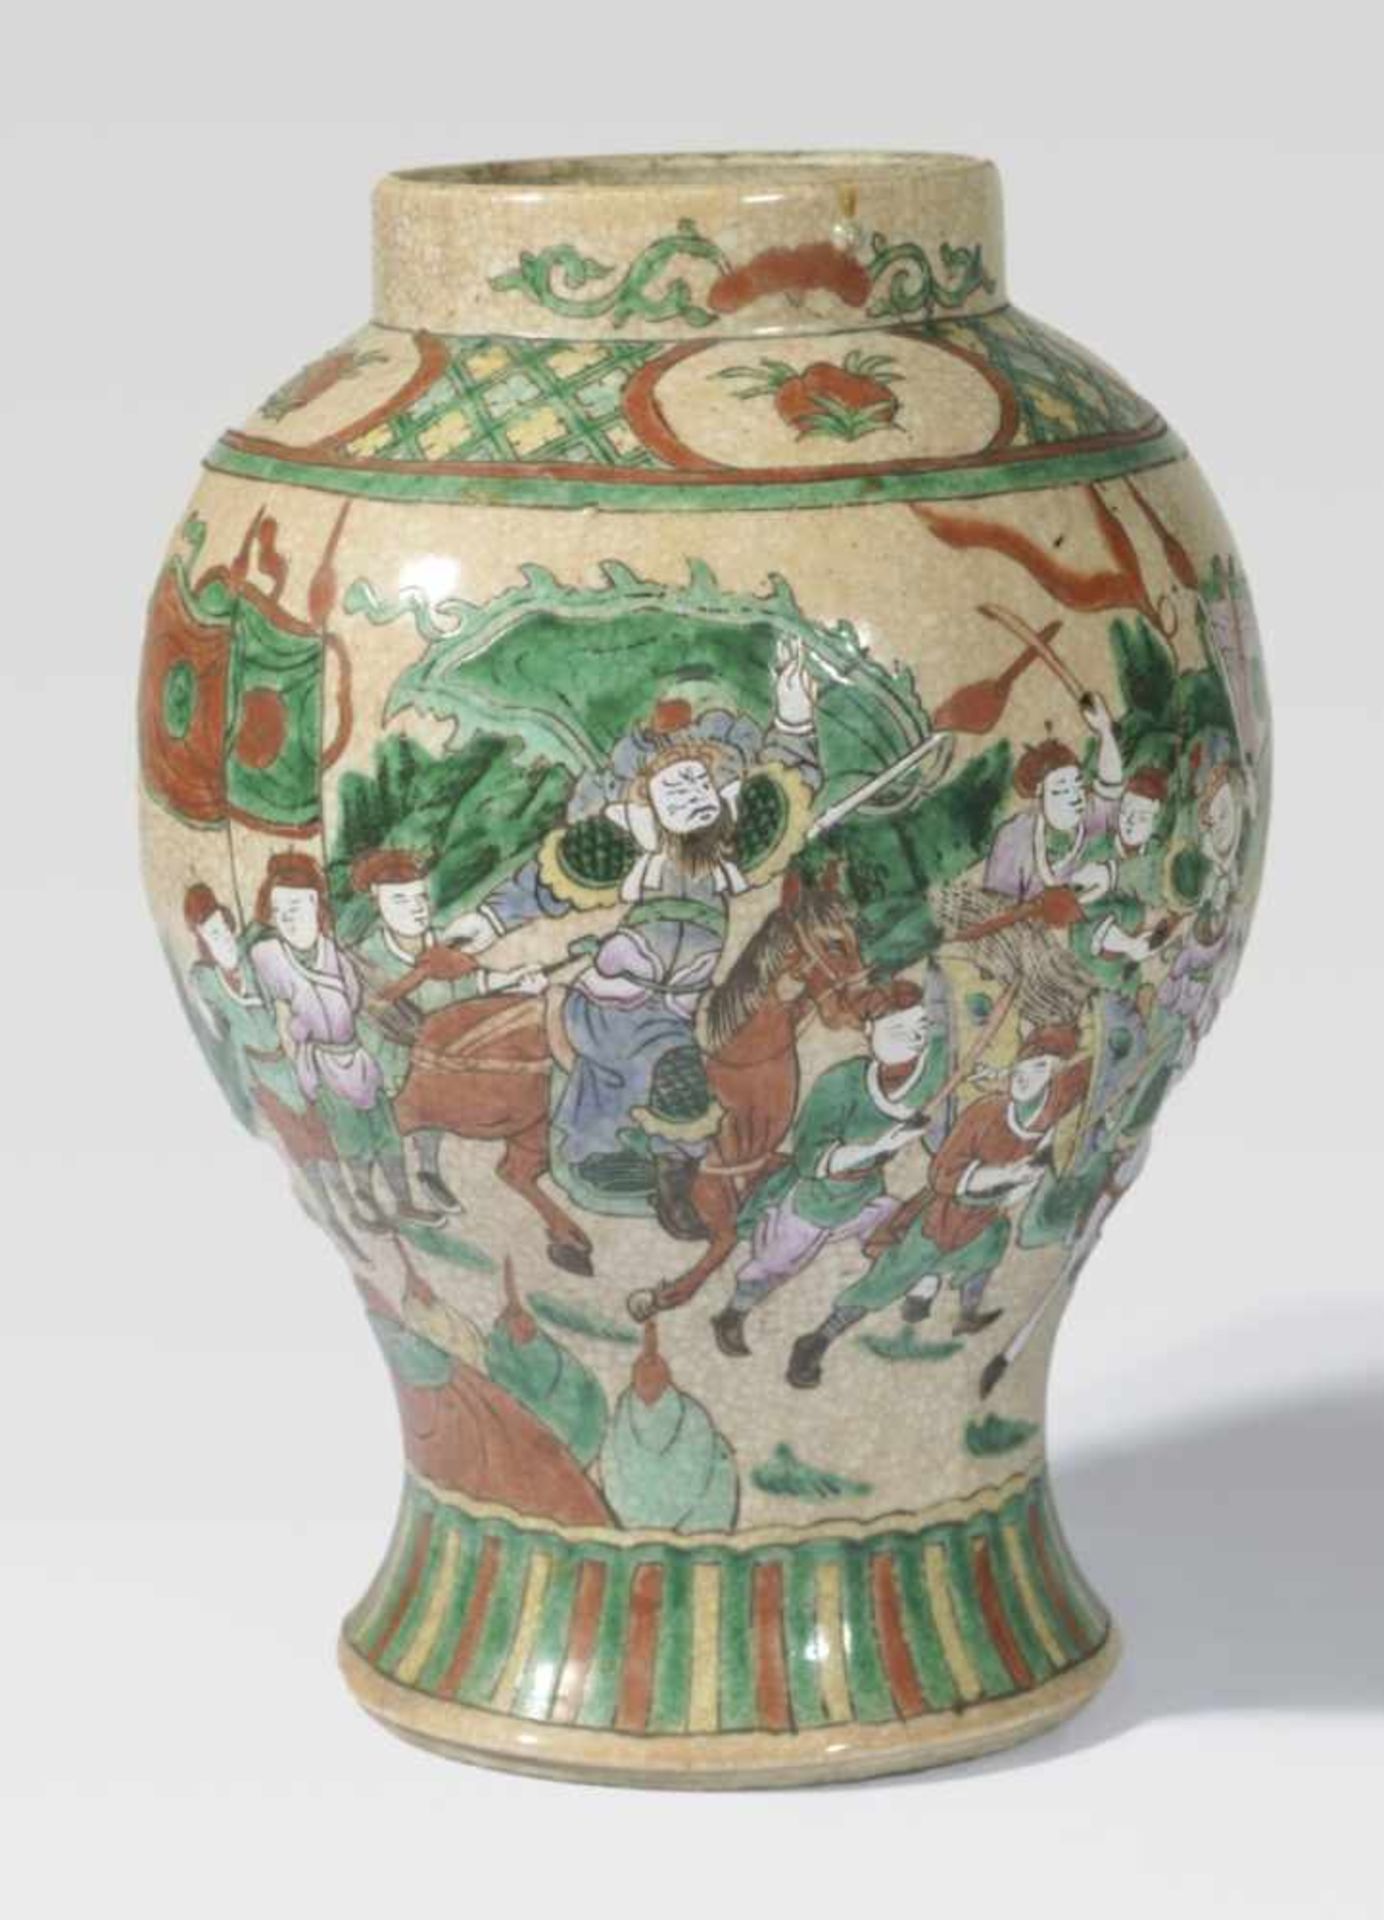 Japanese Vase with Warriors, 20th c., 31 cm high, Provenance: Private property Lucerne